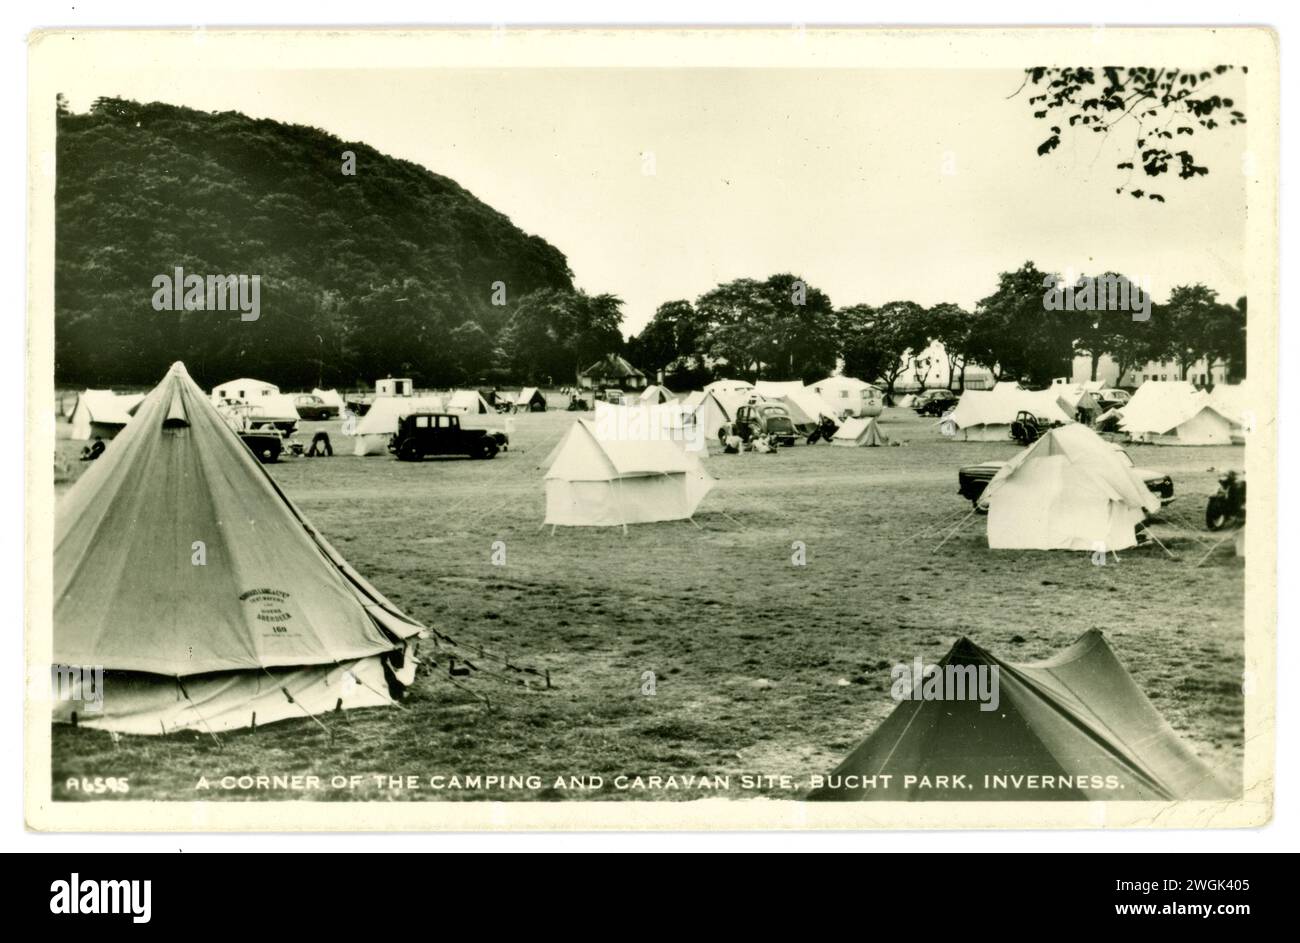 Original 1950's or early 1960's postcard of  a Scottish campsite - camping and caravan site, lots of canvas and canvas tents, old vehicles, bell tents, at Bught Park, Inverness, Scotland, U.K. Stock Photo